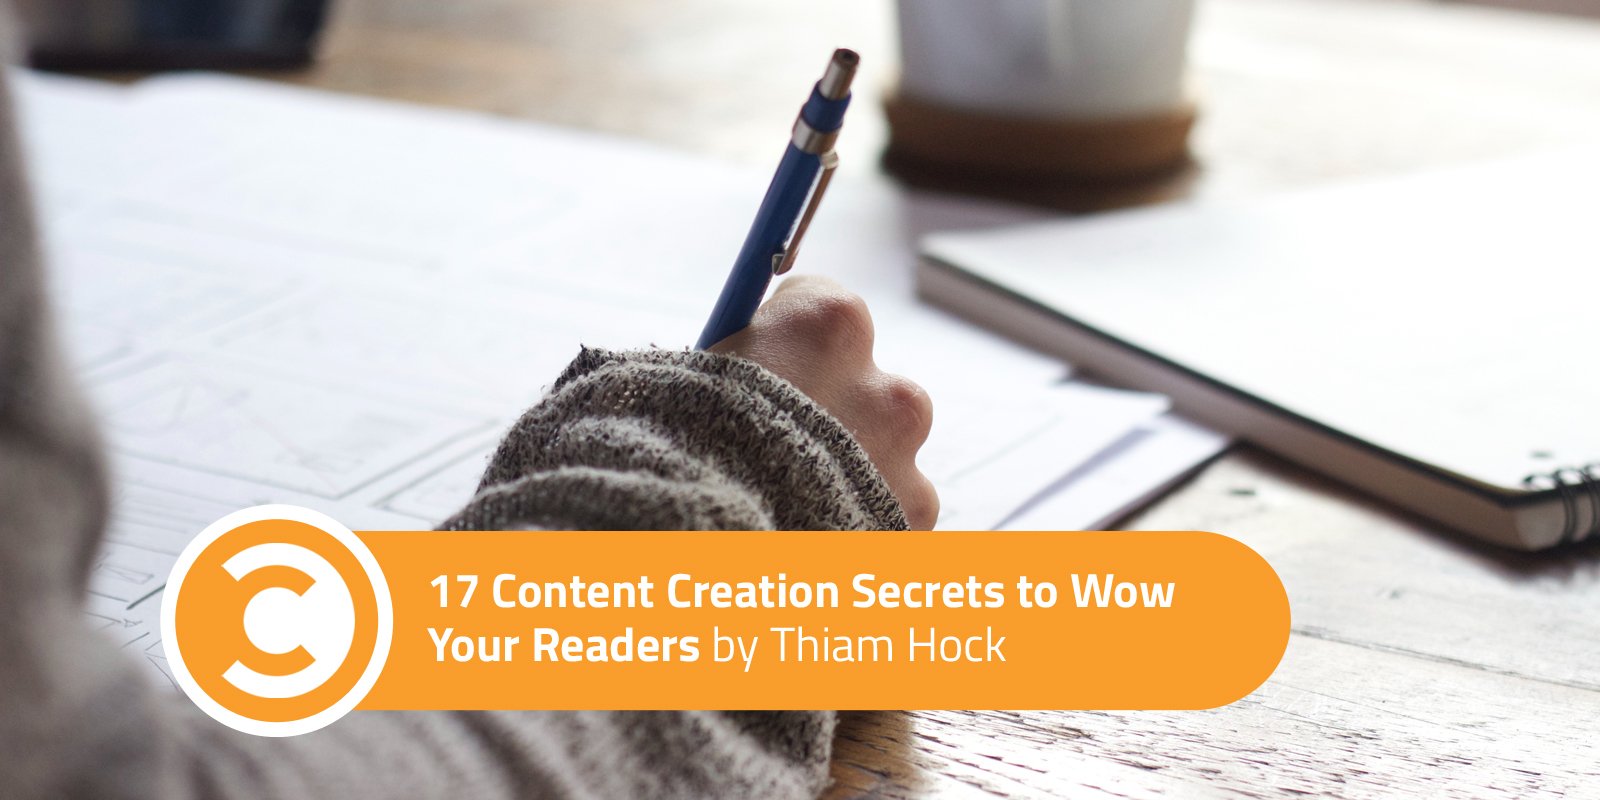 17 Content Creation Secrets to Wow Your Readers